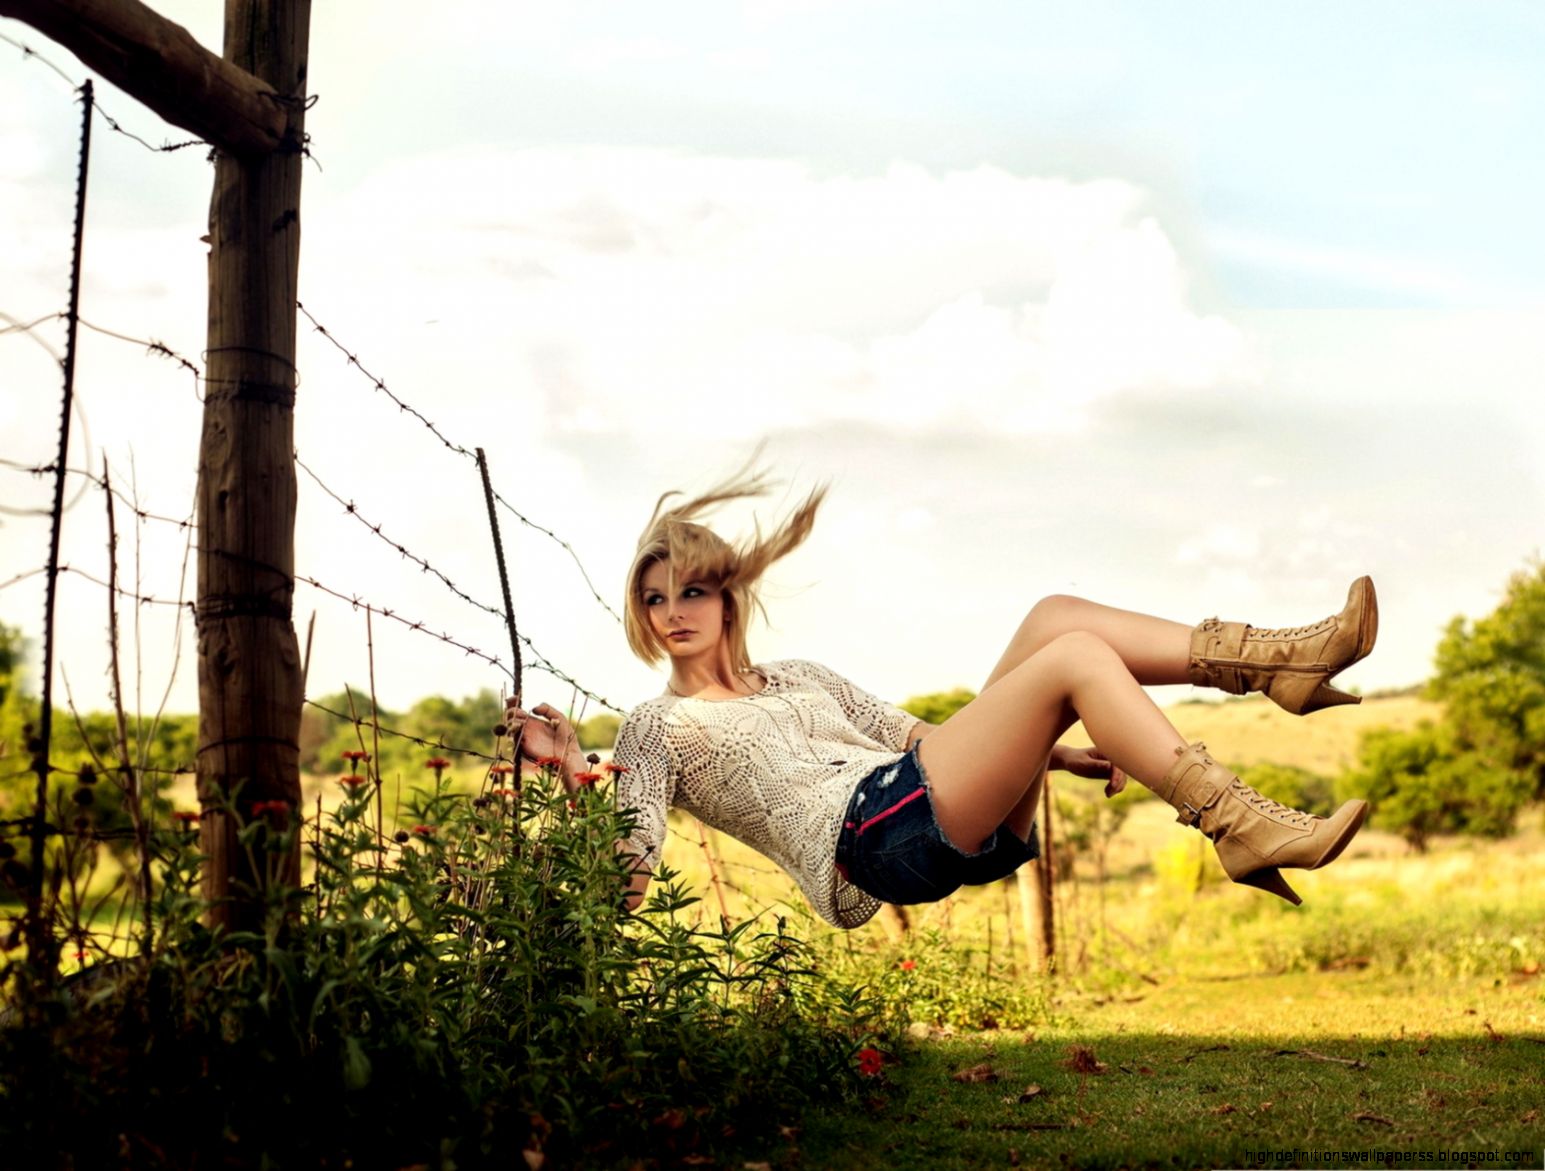 Girl On Swing Photography - Floating Illusion Photography - HD Wallpaper 